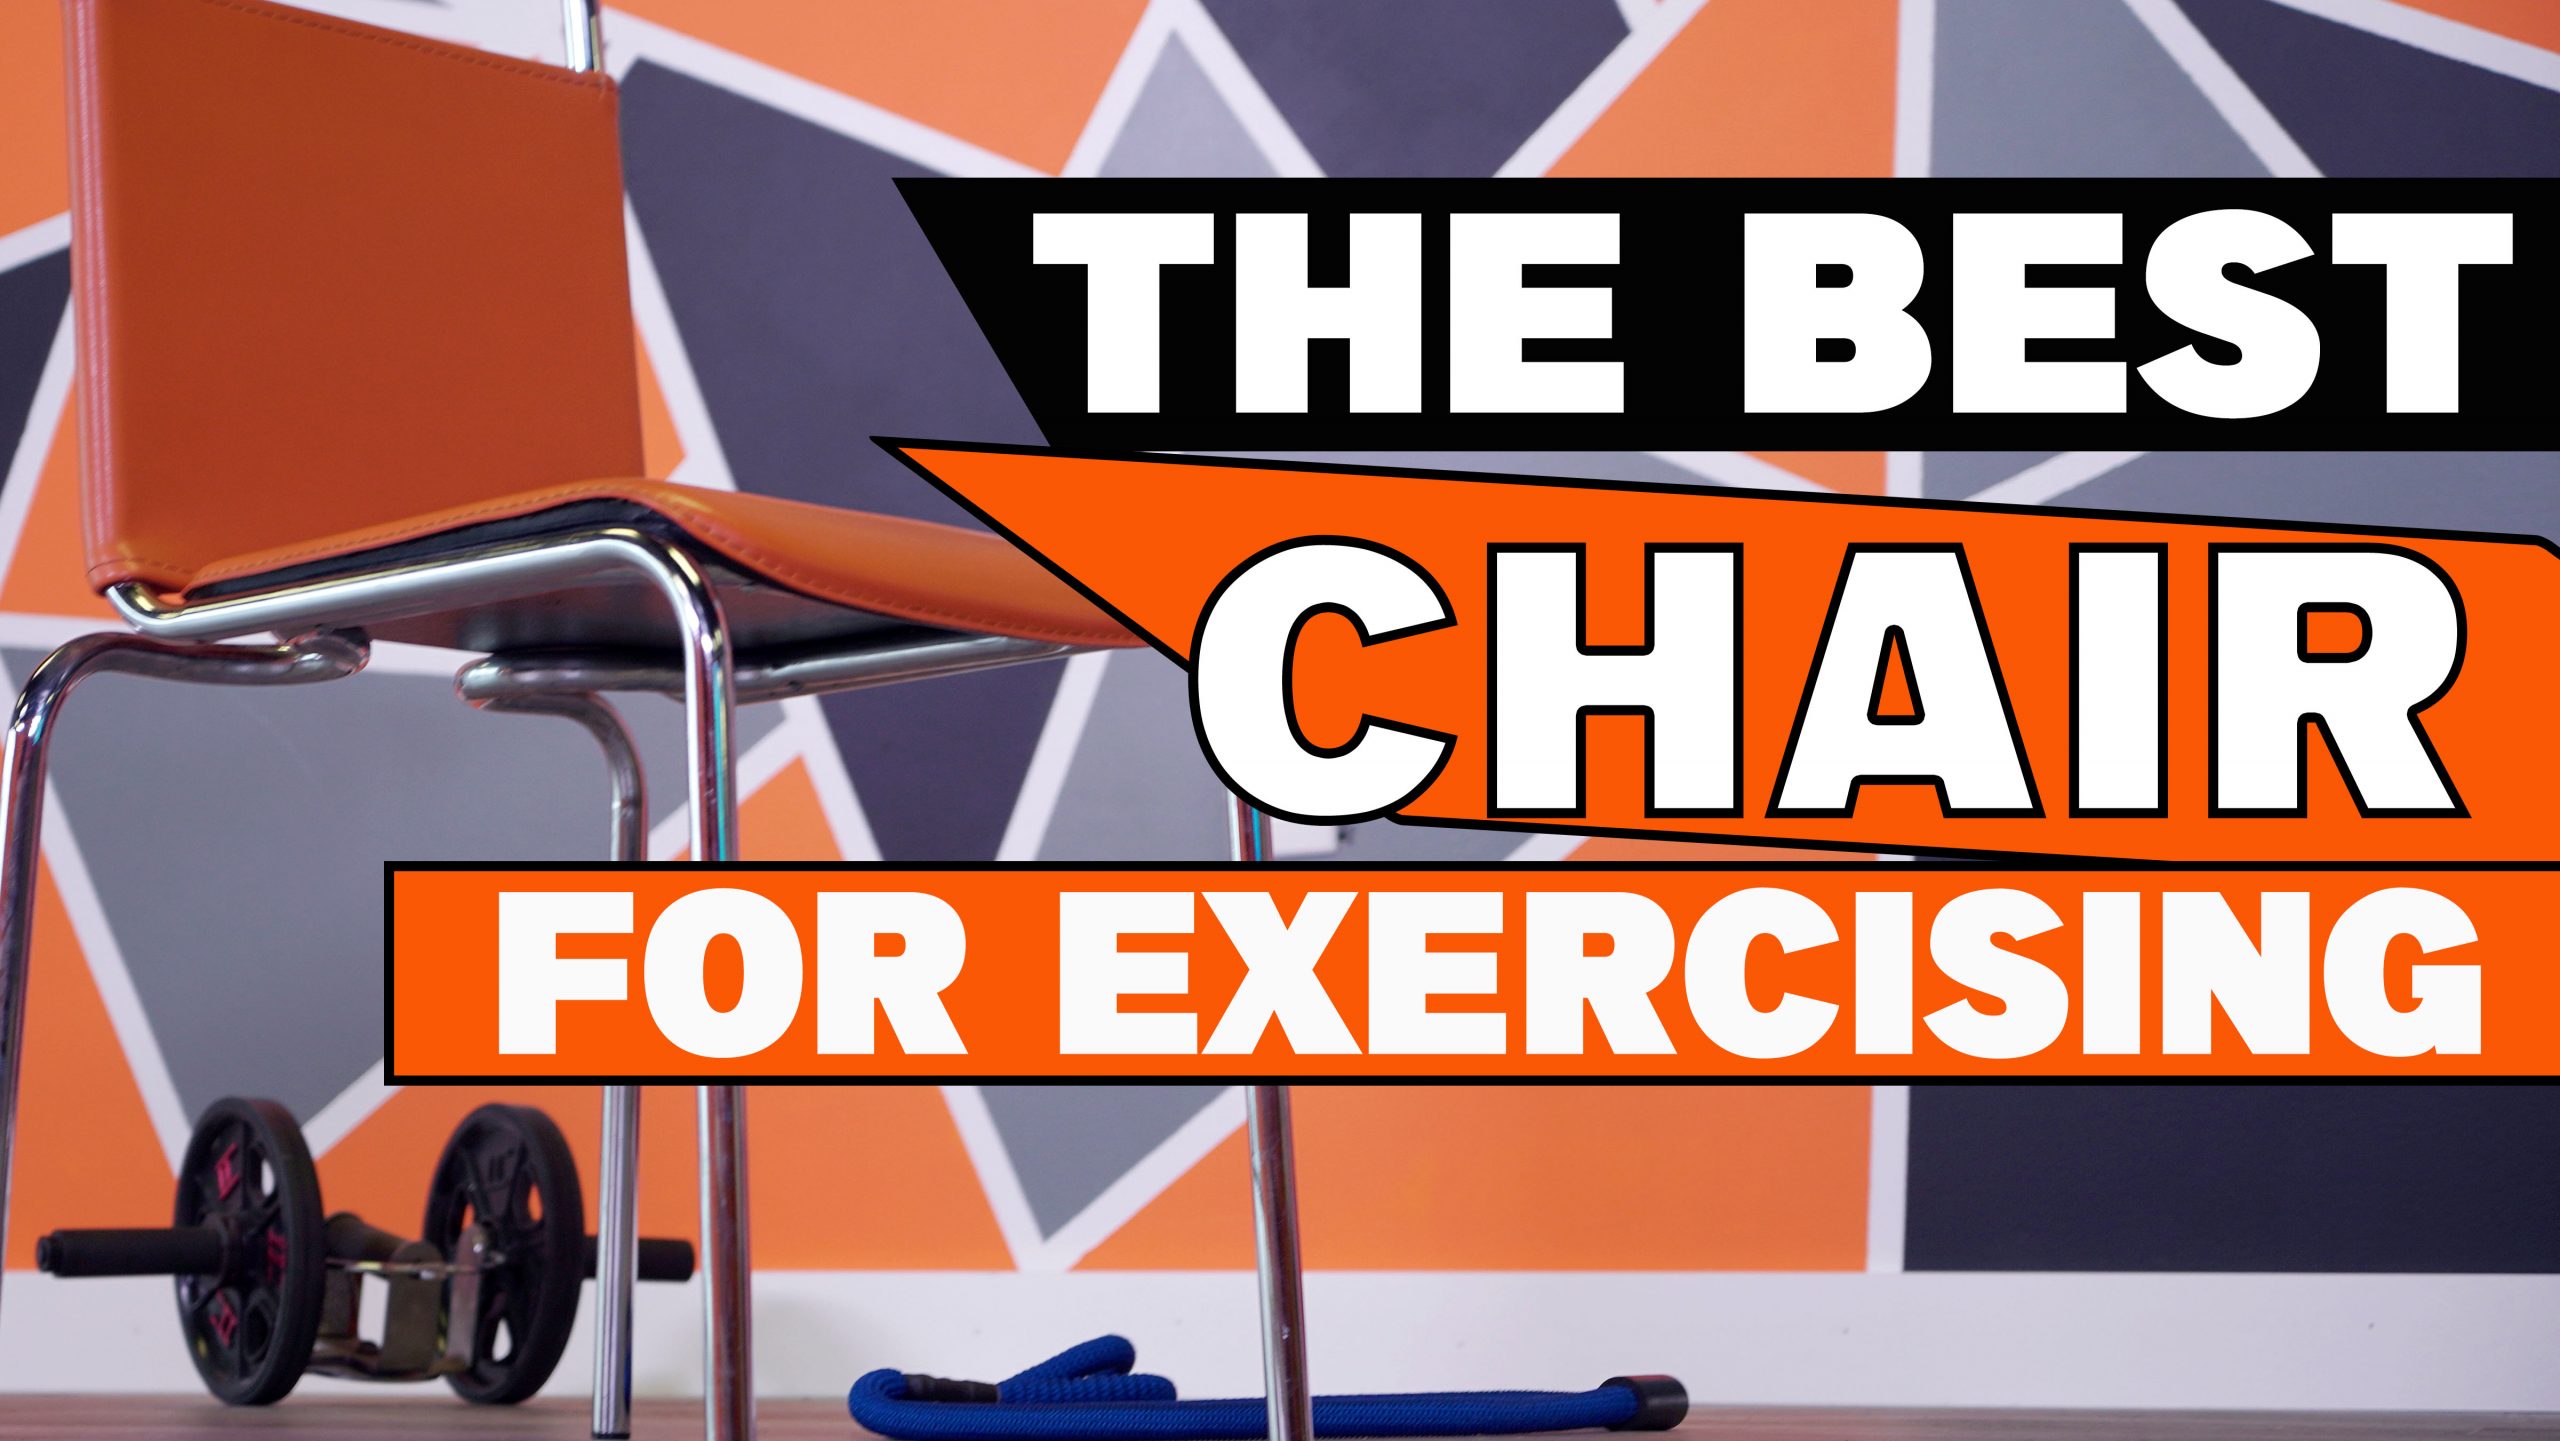 Choosing The Best Chair For Exercise